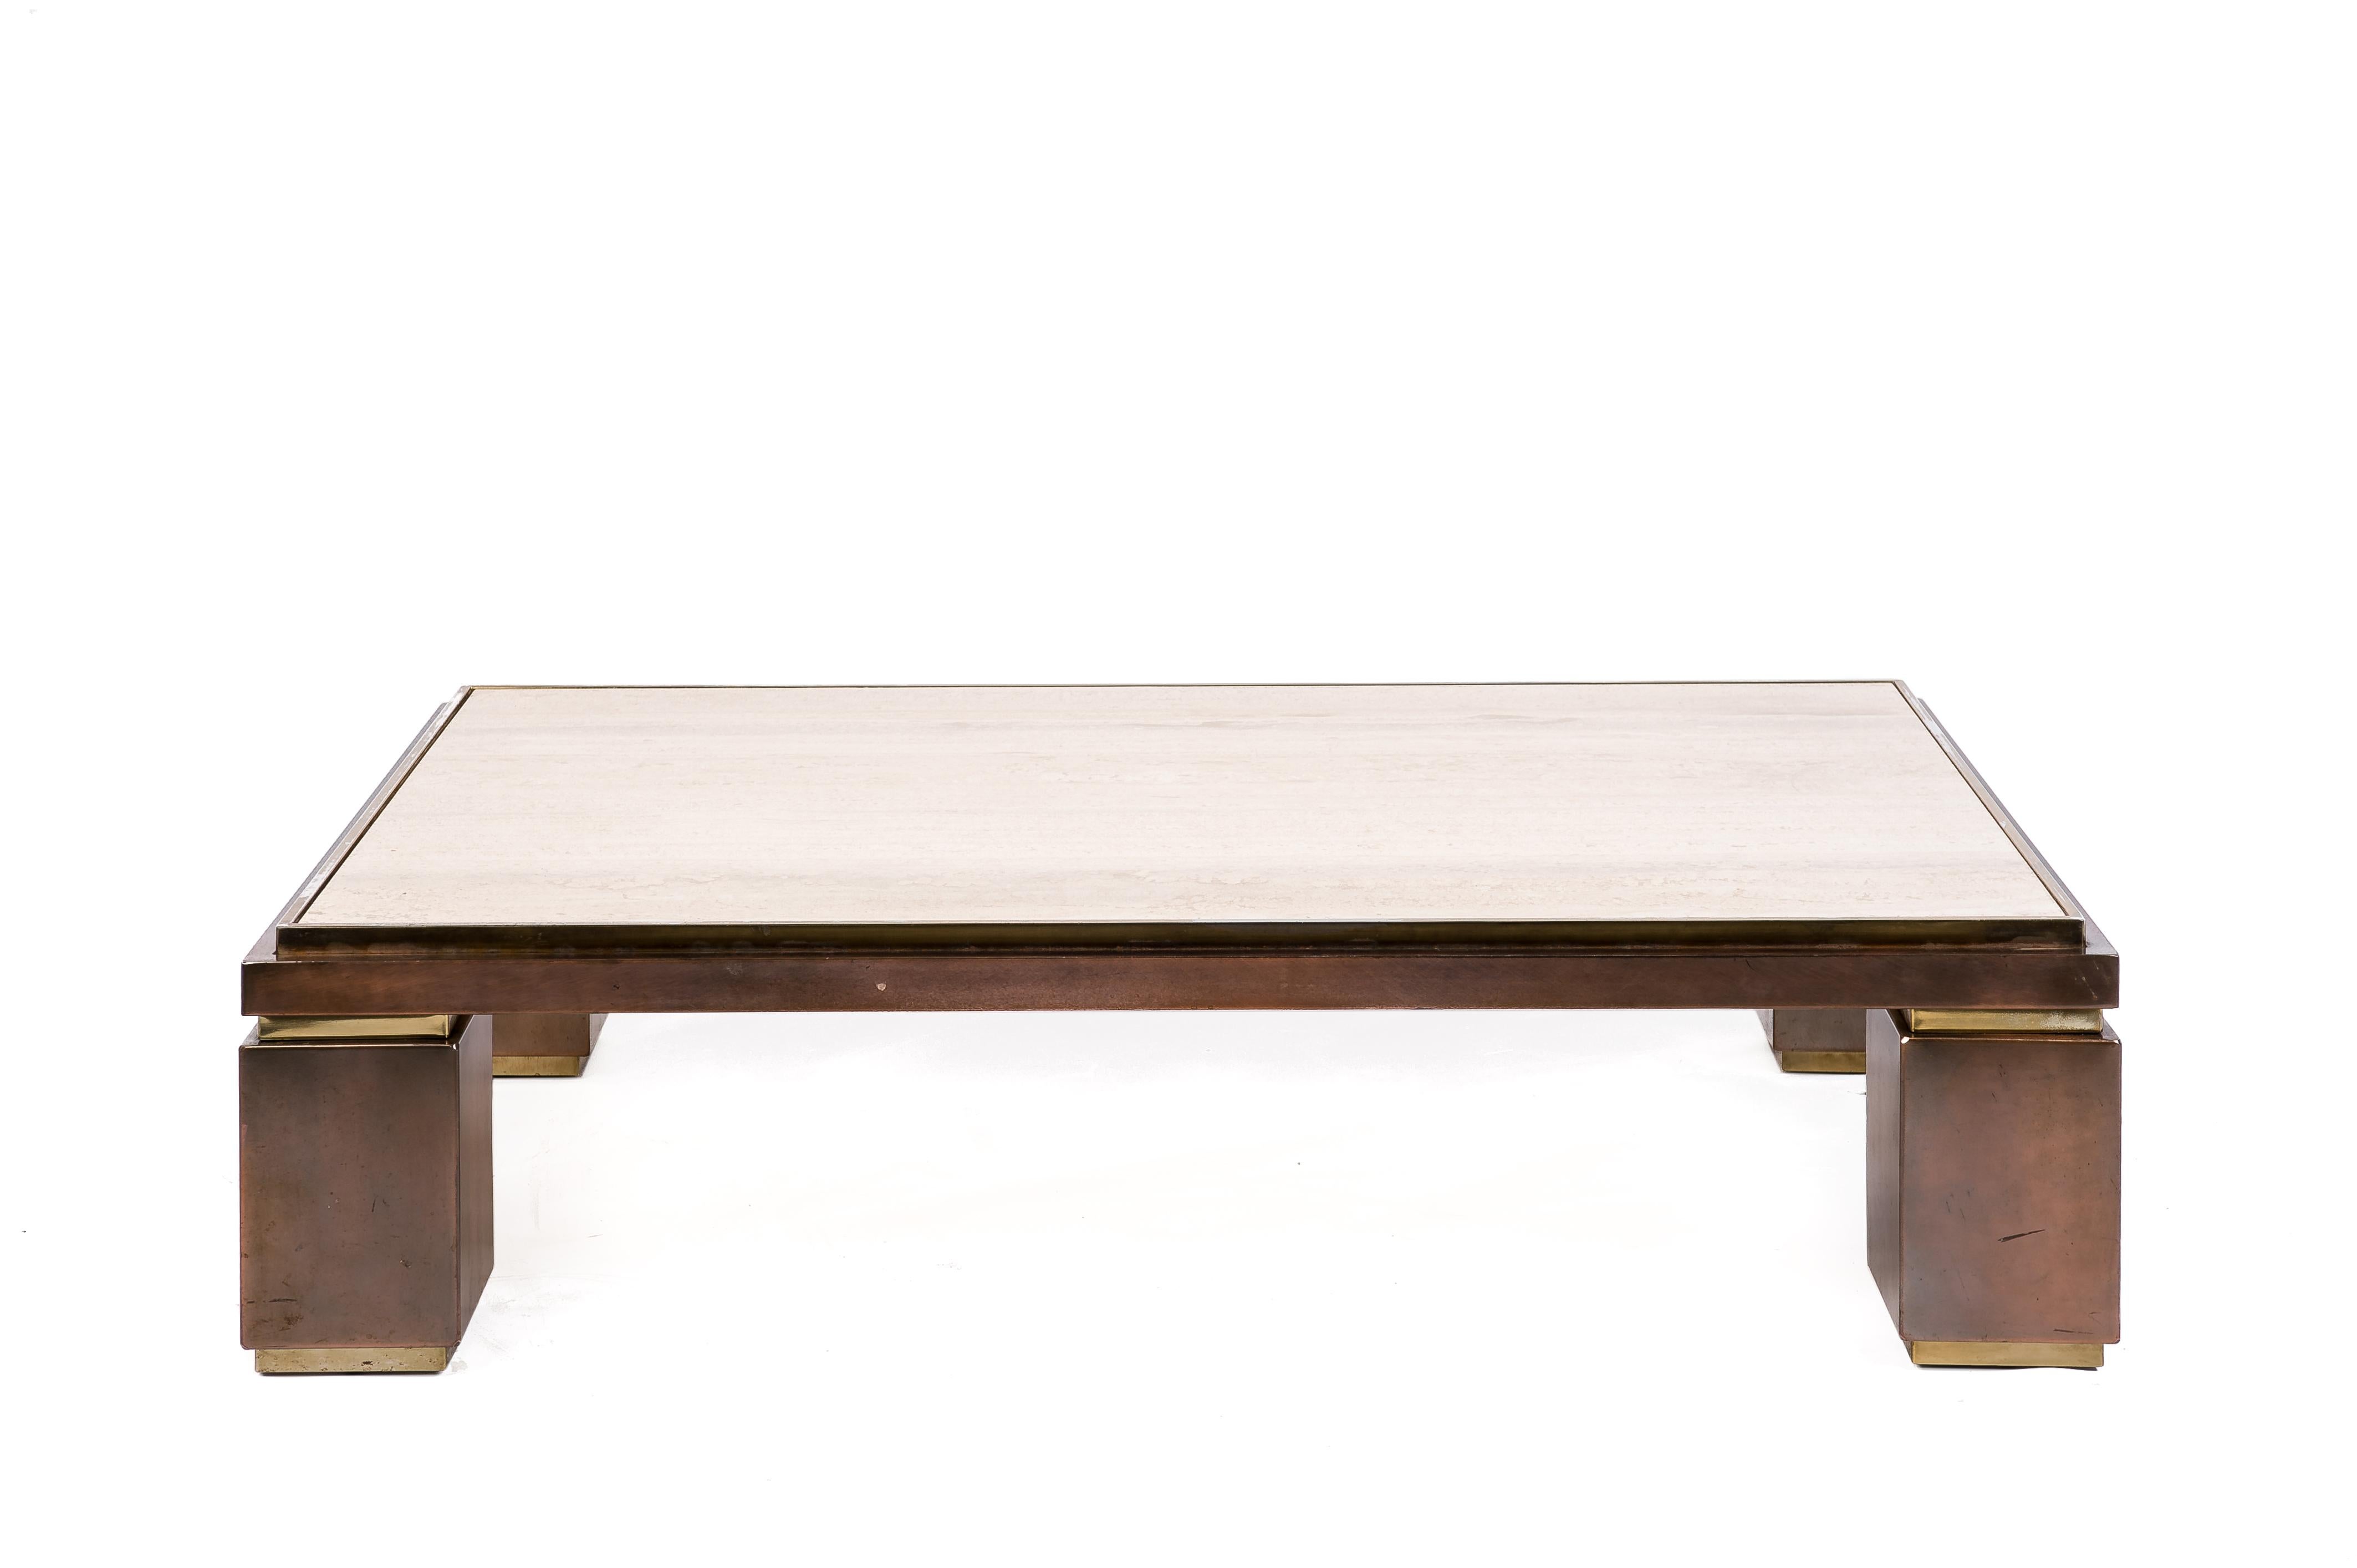 A very special Belgo Chrome sculptural coffee table with a solid travertine top on a bi-color brass base finished with chrome, copper, and brass. This table was made in Belgium in the late 1970s. The Belgian company Belgo Chrom was known for its